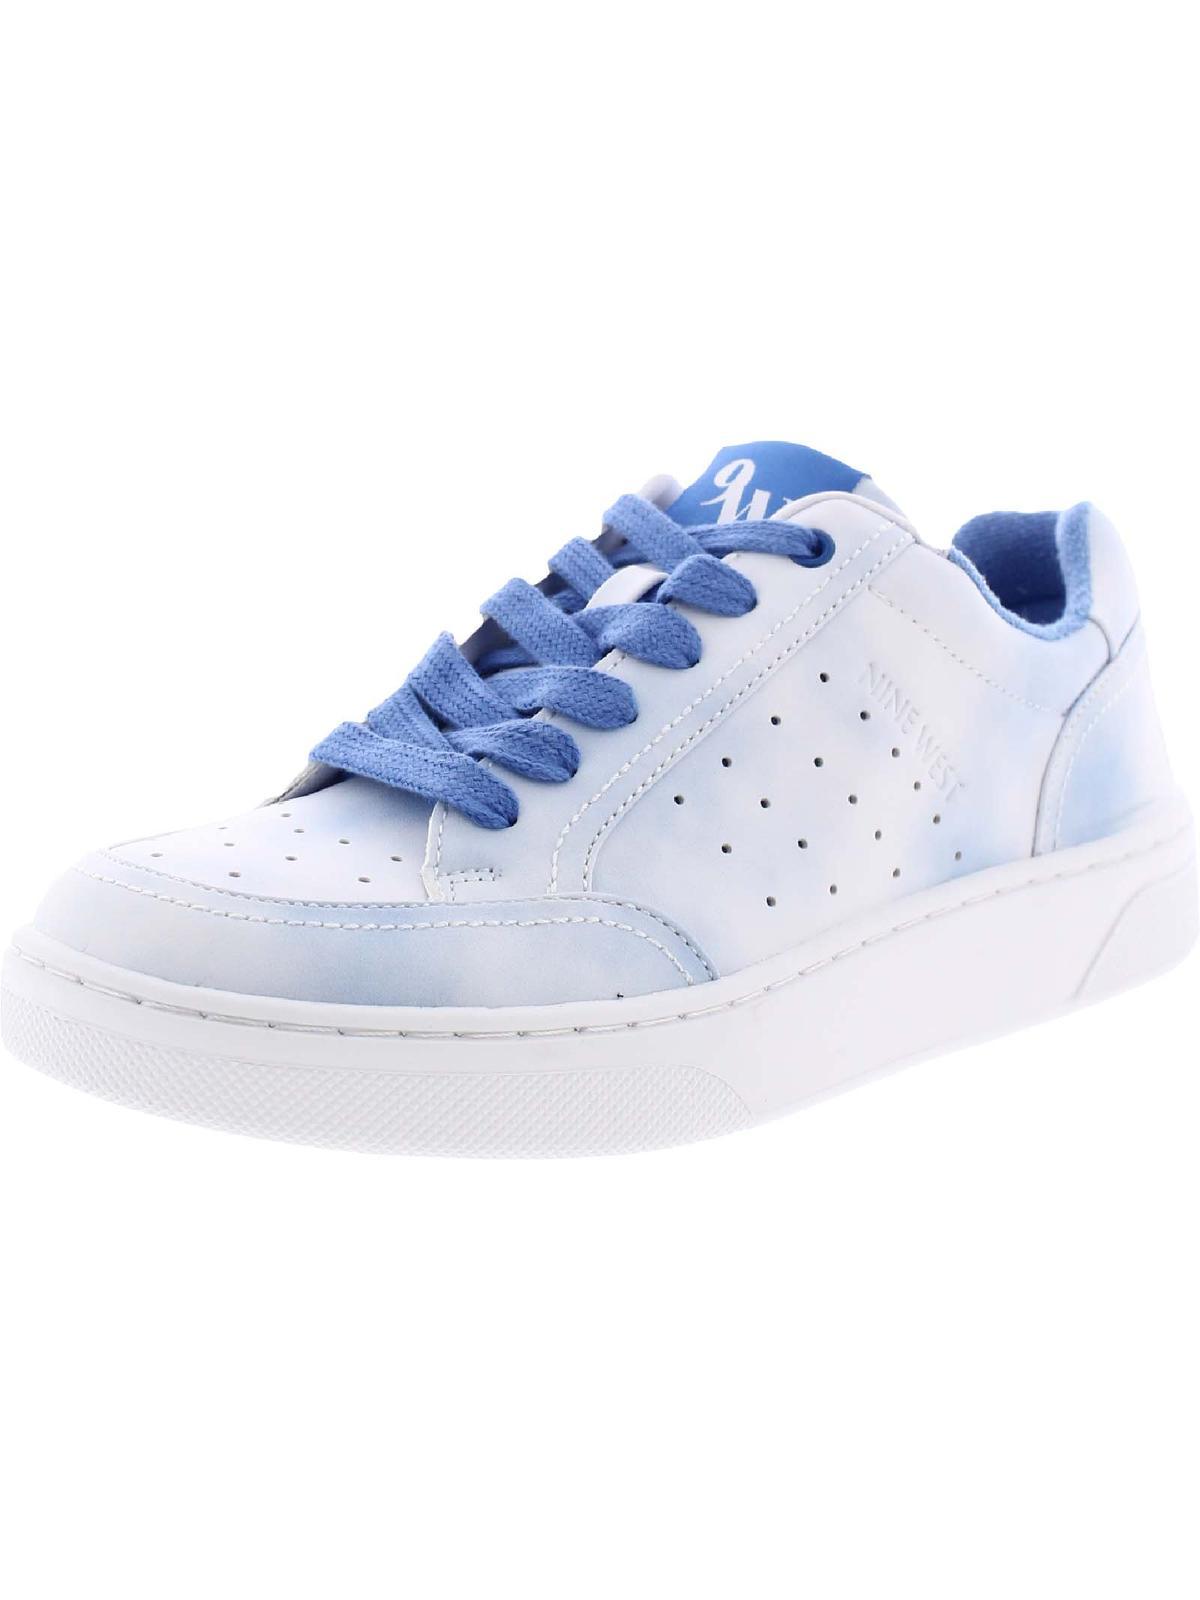 Nine West Even 3 Gym Fitness Athletic And Training Shoes in Blue | Lyst